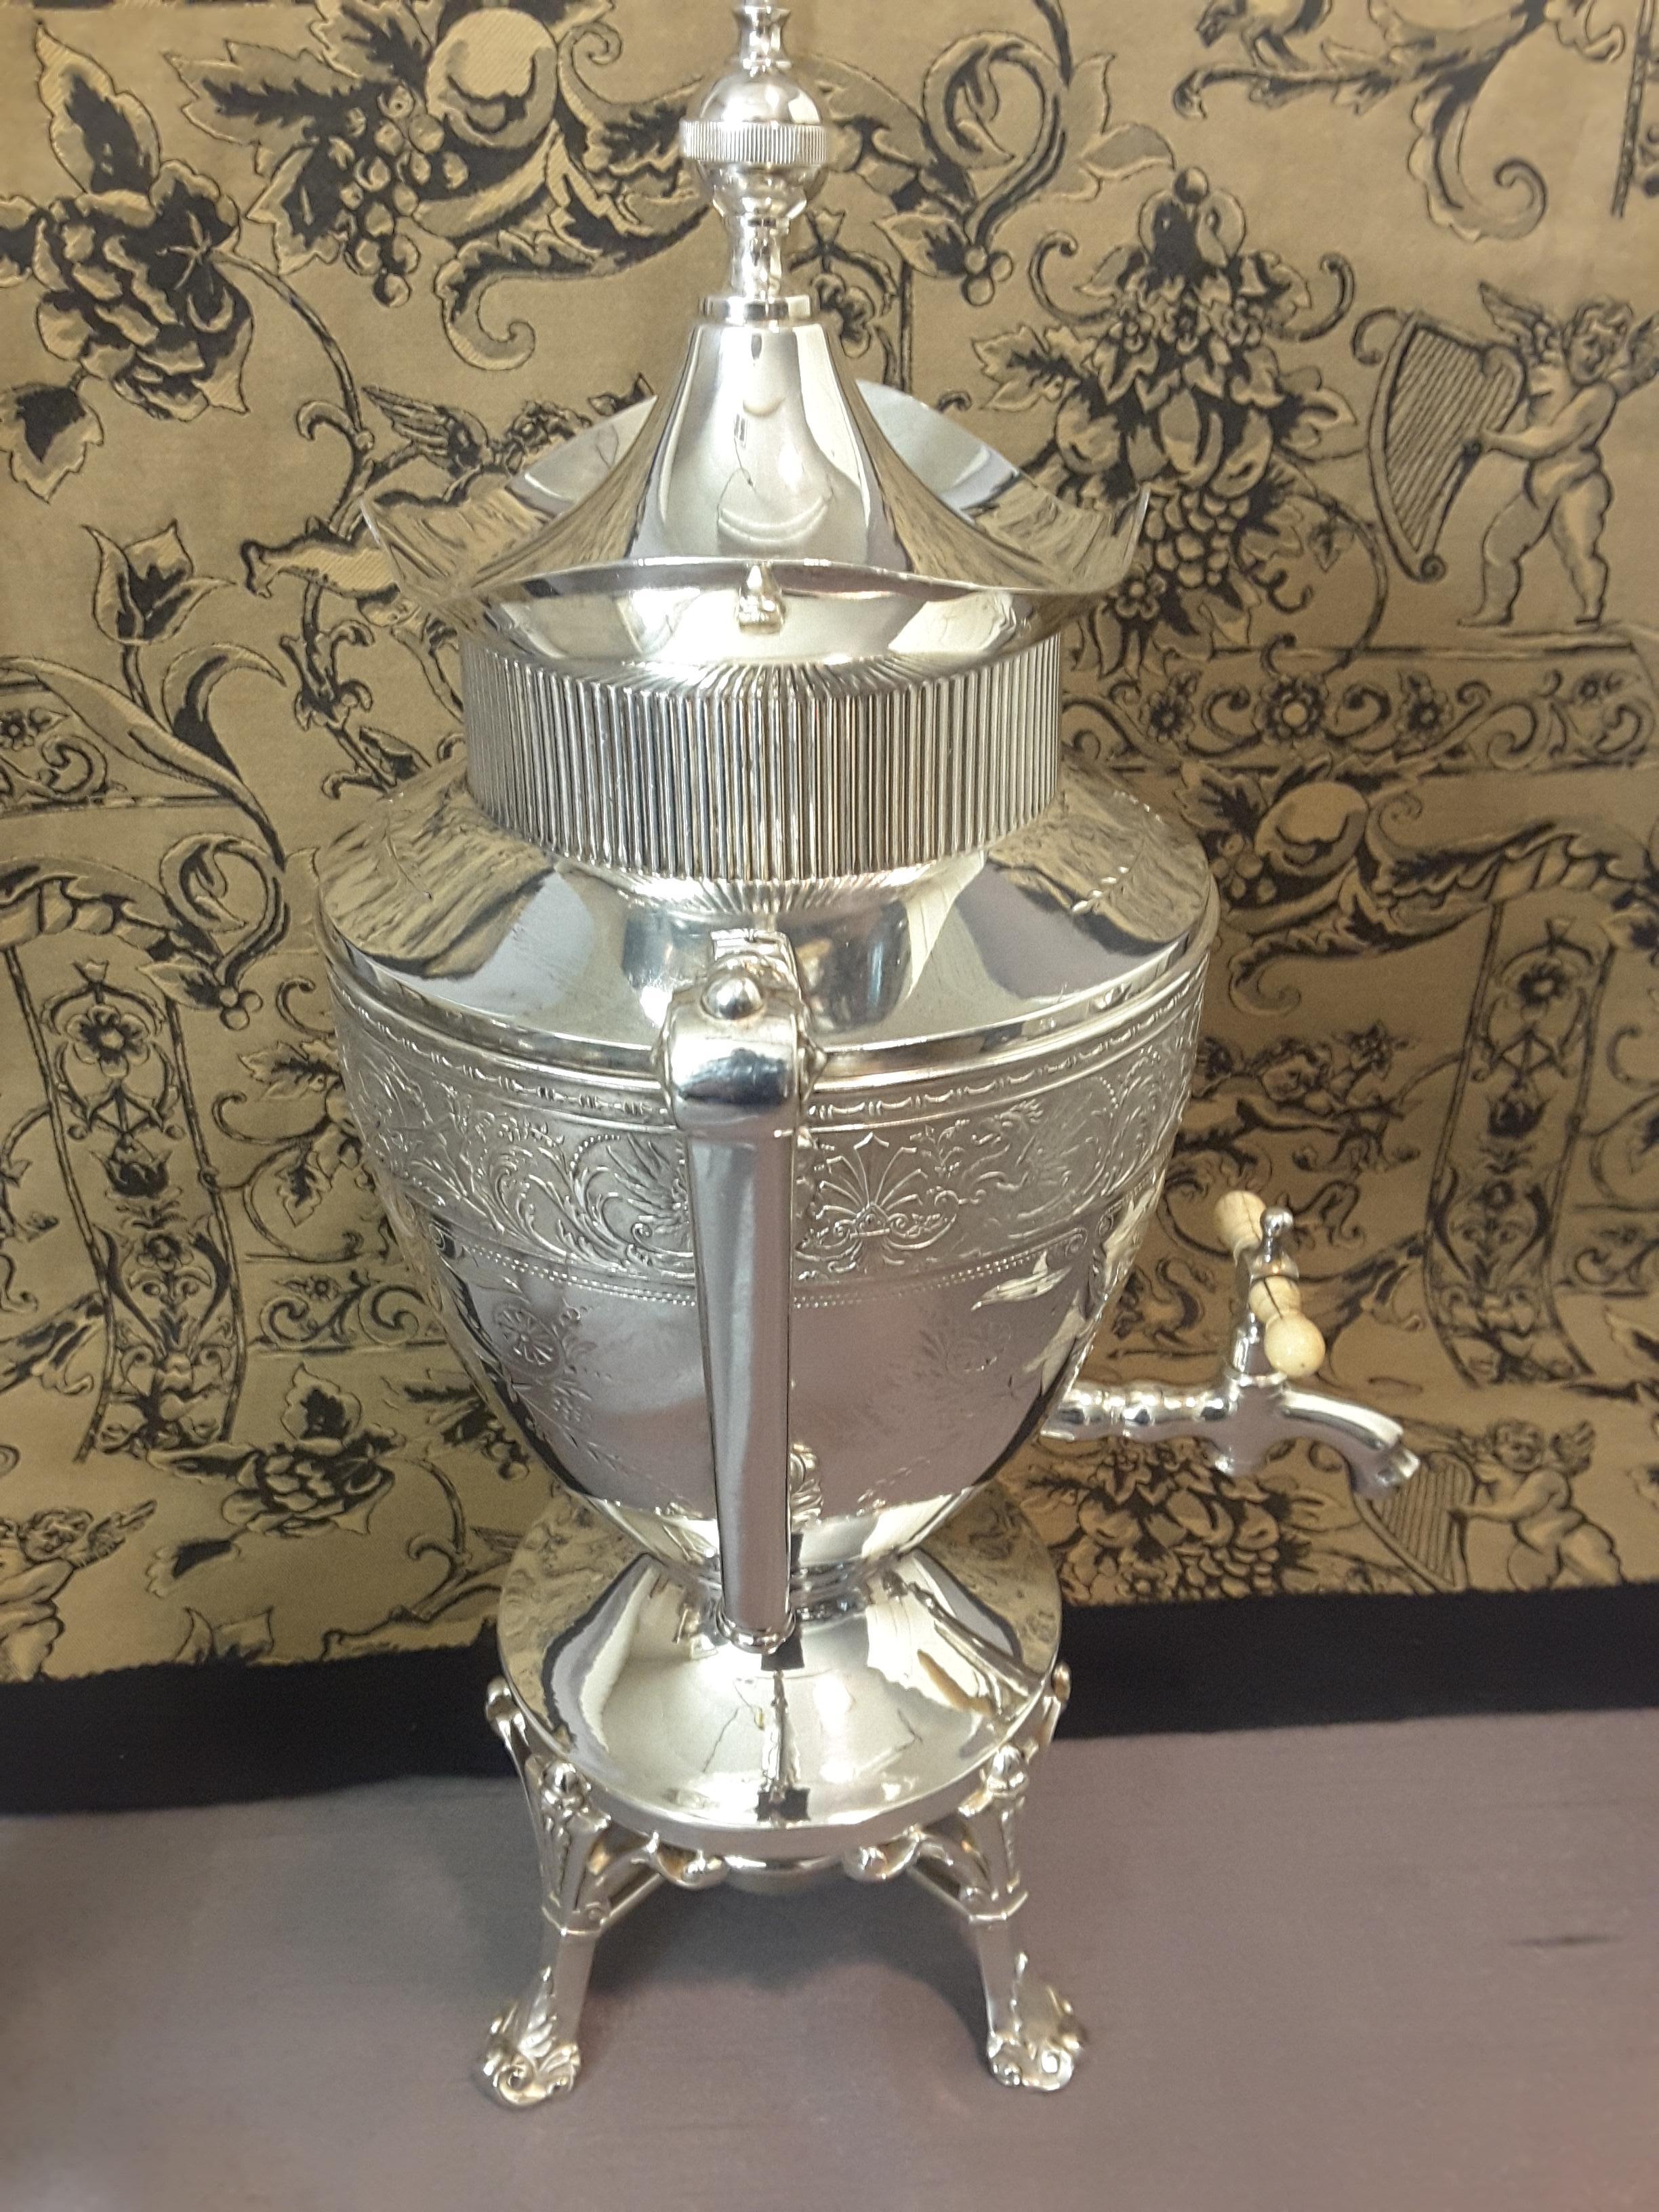 Exquisite Aesthetic Movement Silverplated Tea Service by Simpson, Hall & Miller For Sale 7